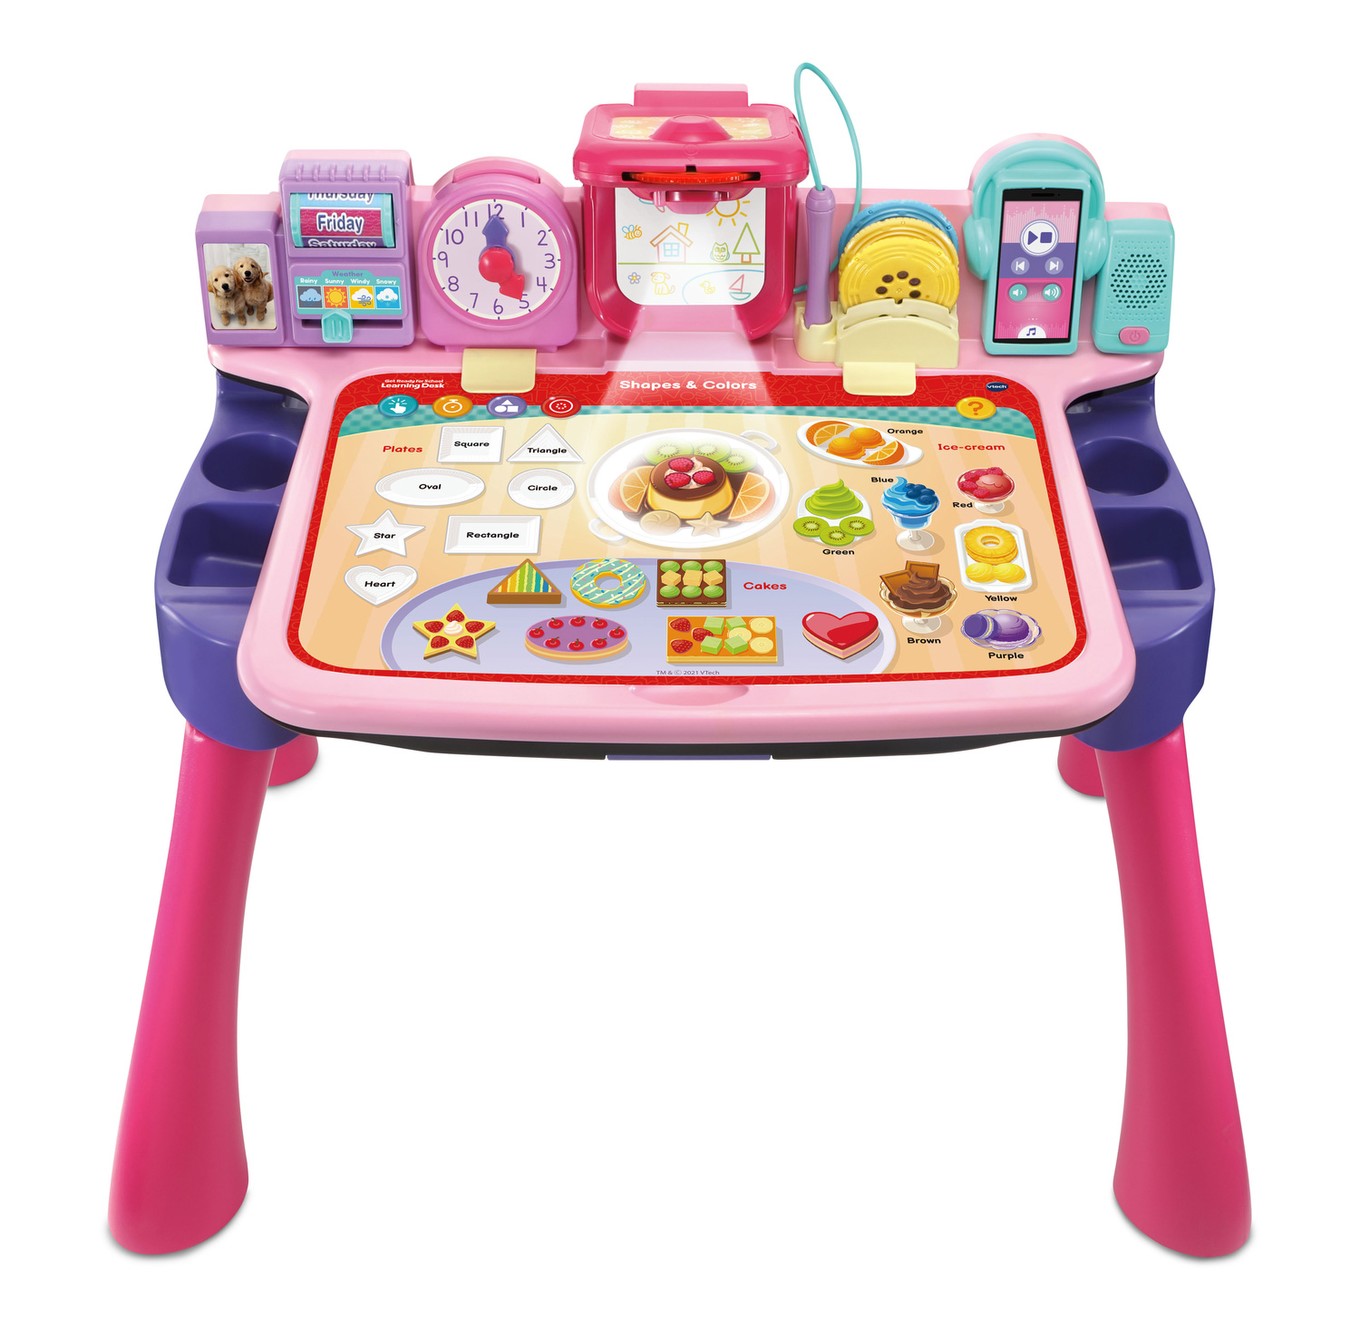 Paint Pucks  Education Station - Teaching Supplies and Educational Products